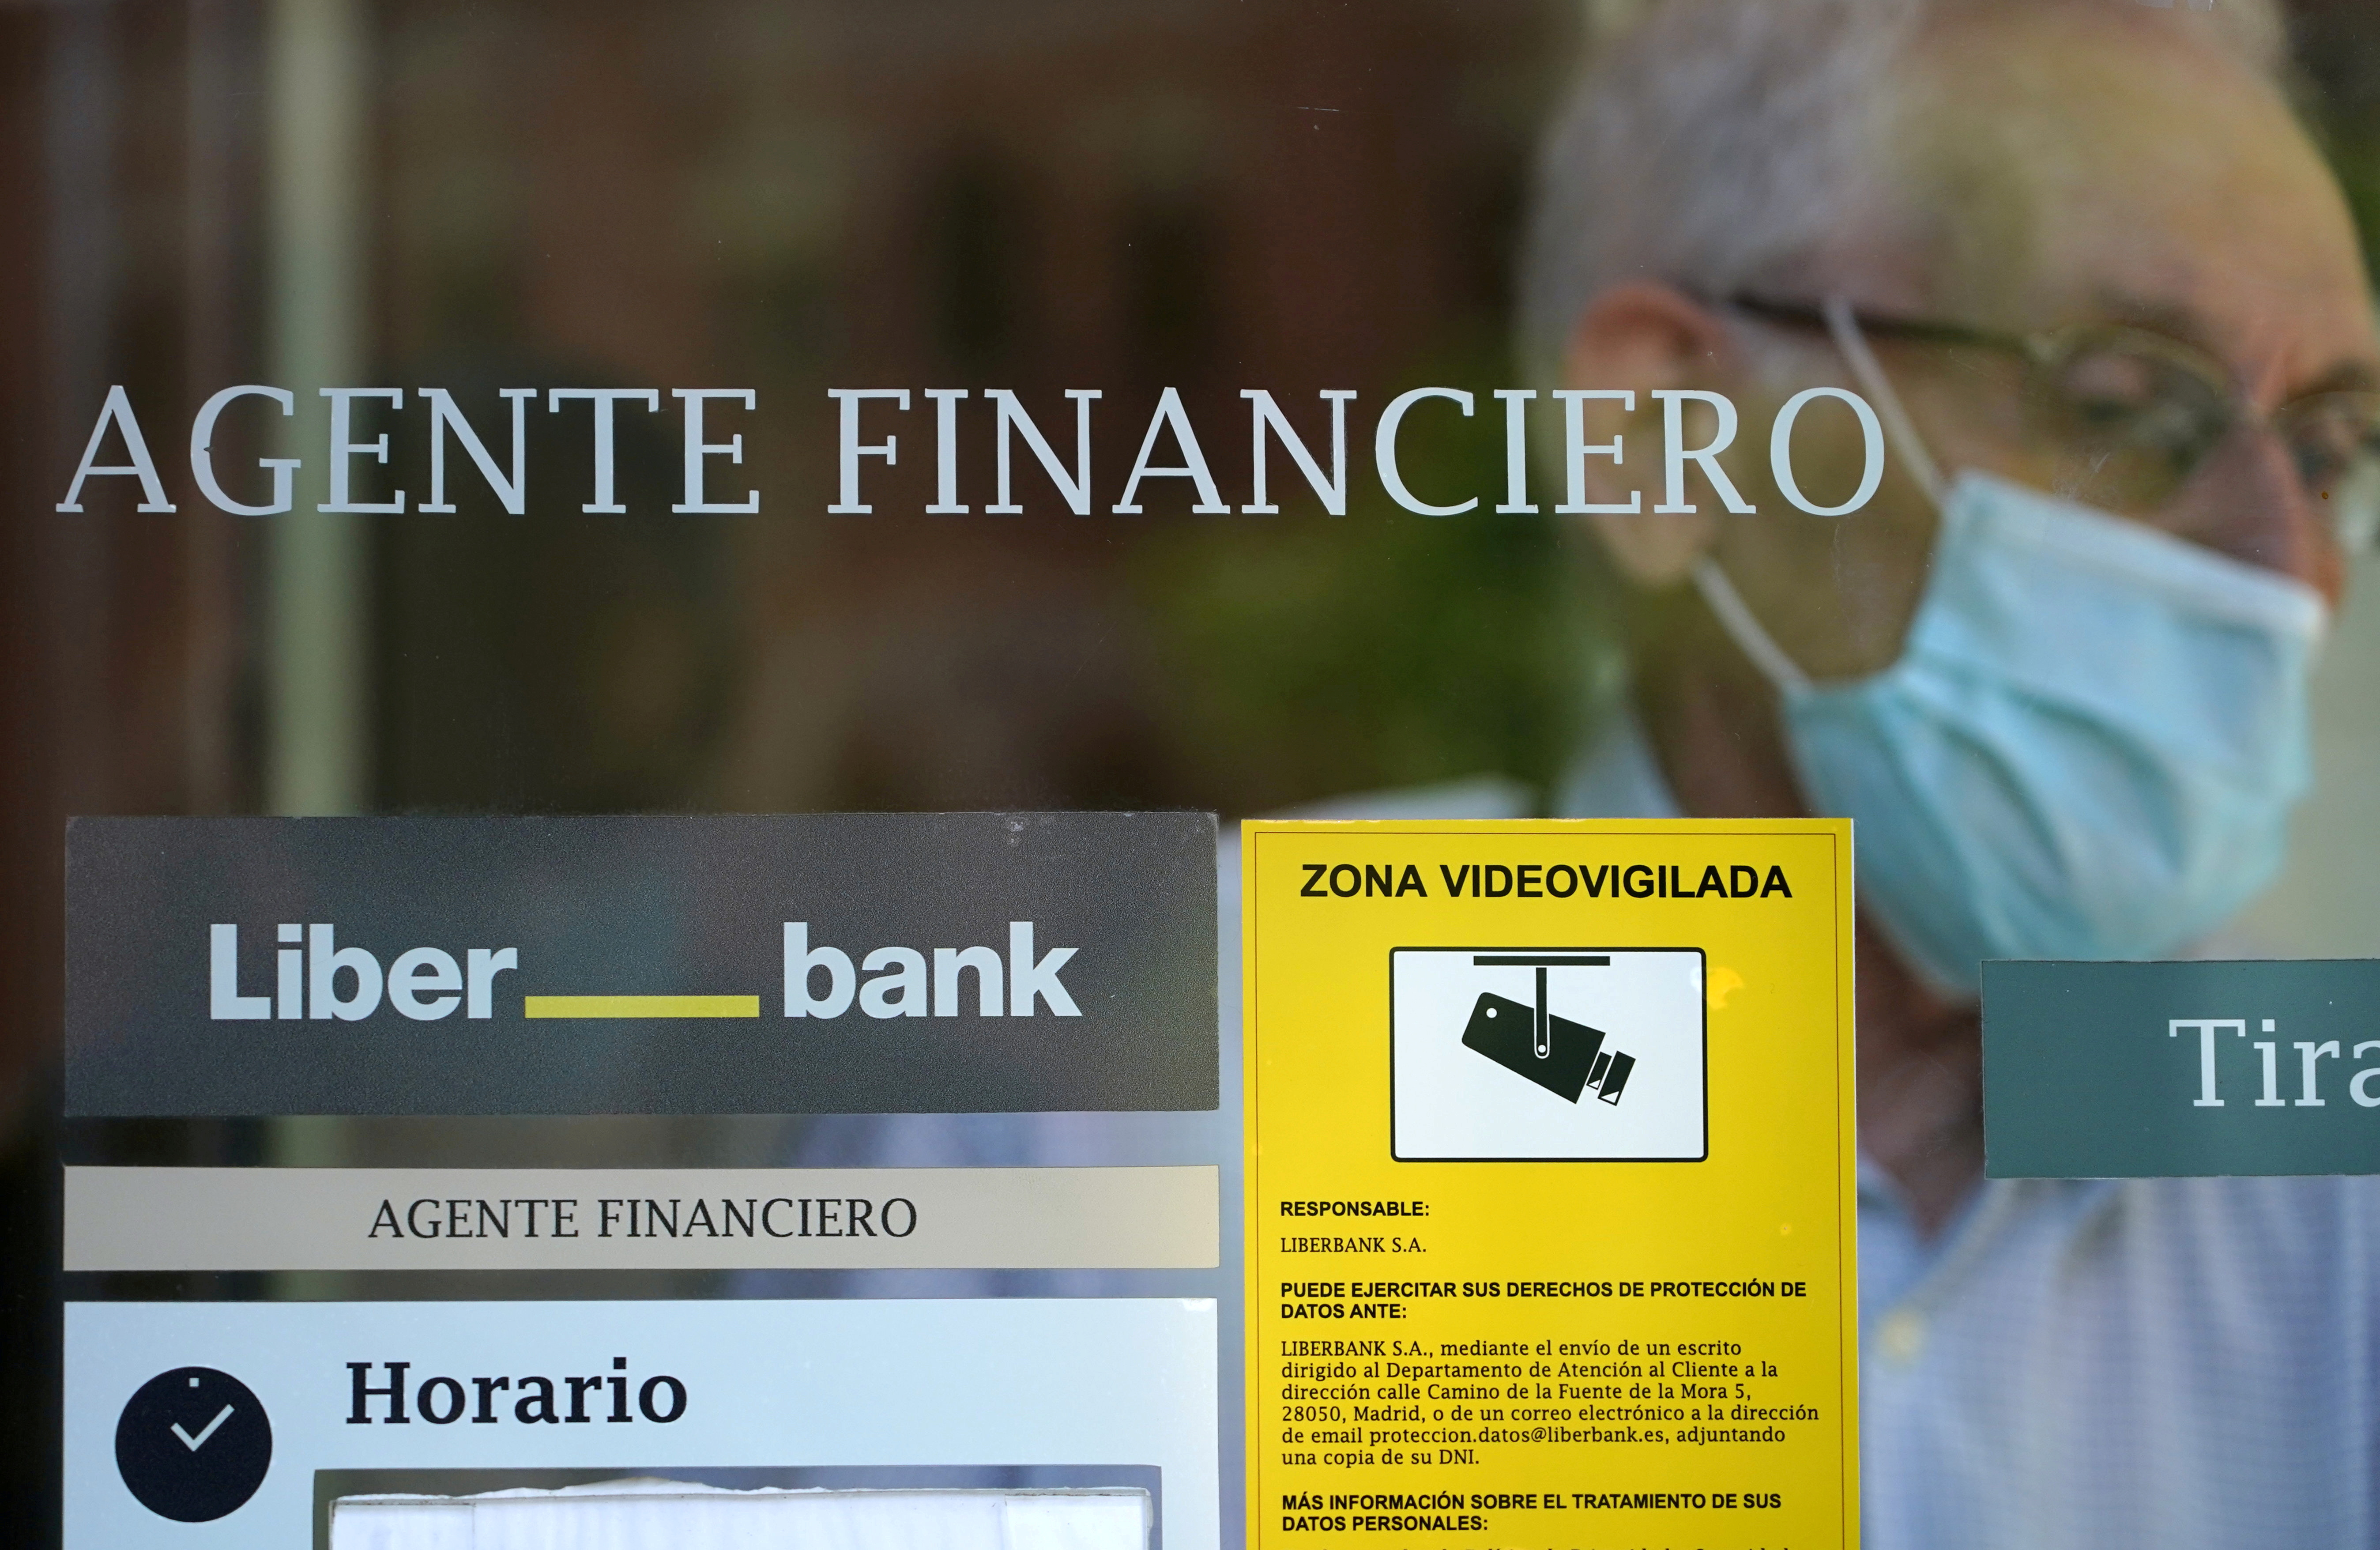 A man leaves the Liberbank financial agency branch in Madrid